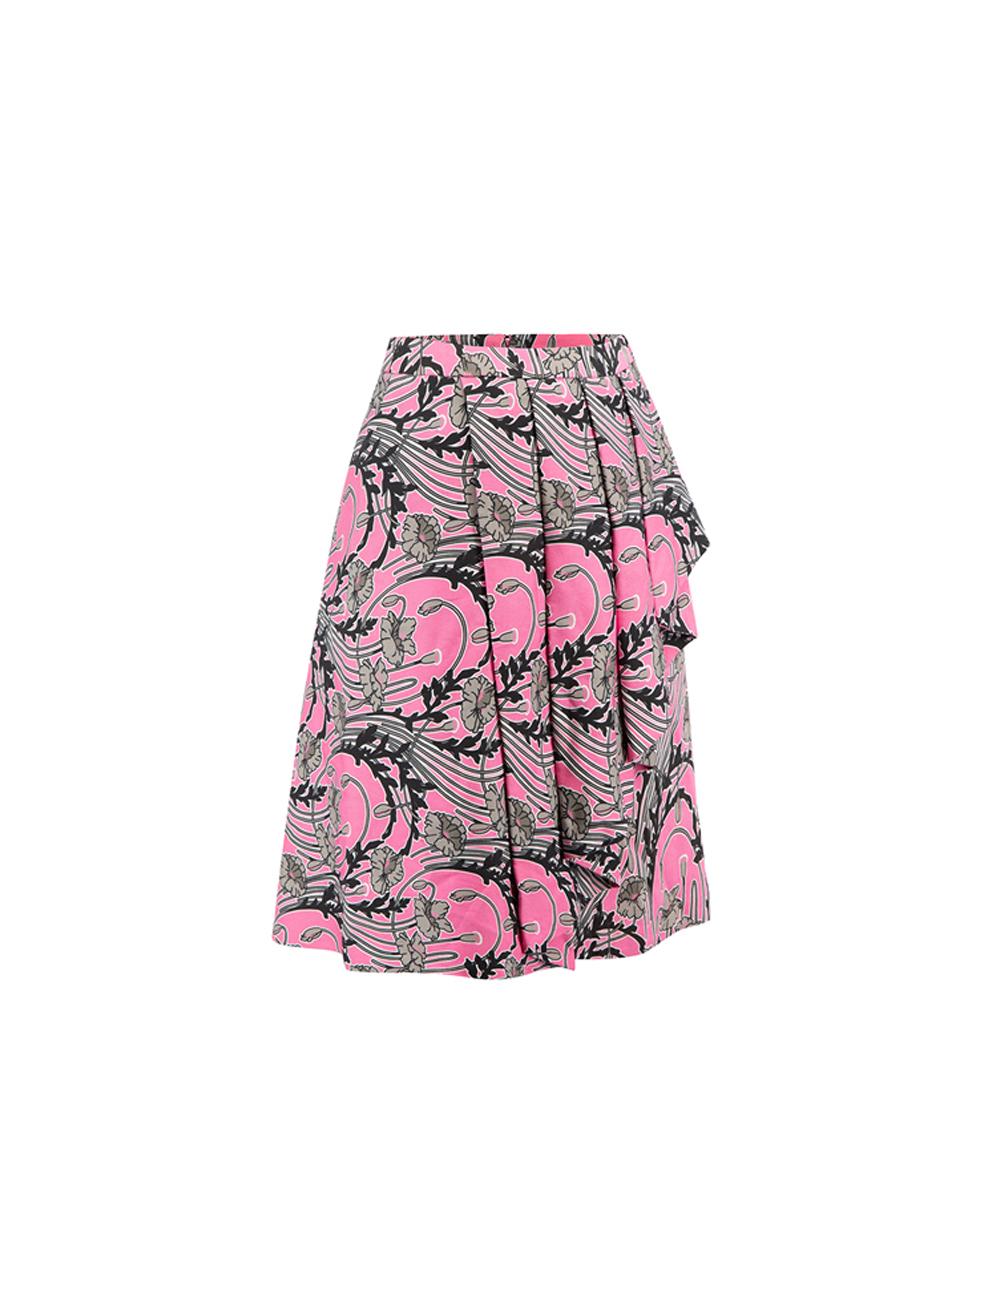 CONDITION is Very good. Hardly any visible wear to skirt is evident on this used Christopher Kane designer resale item.



Details


Pink

Viscose

Mini skirt

Black and grey floral print

Asymmetric pleated detail

Back zip fastening



 

Made in